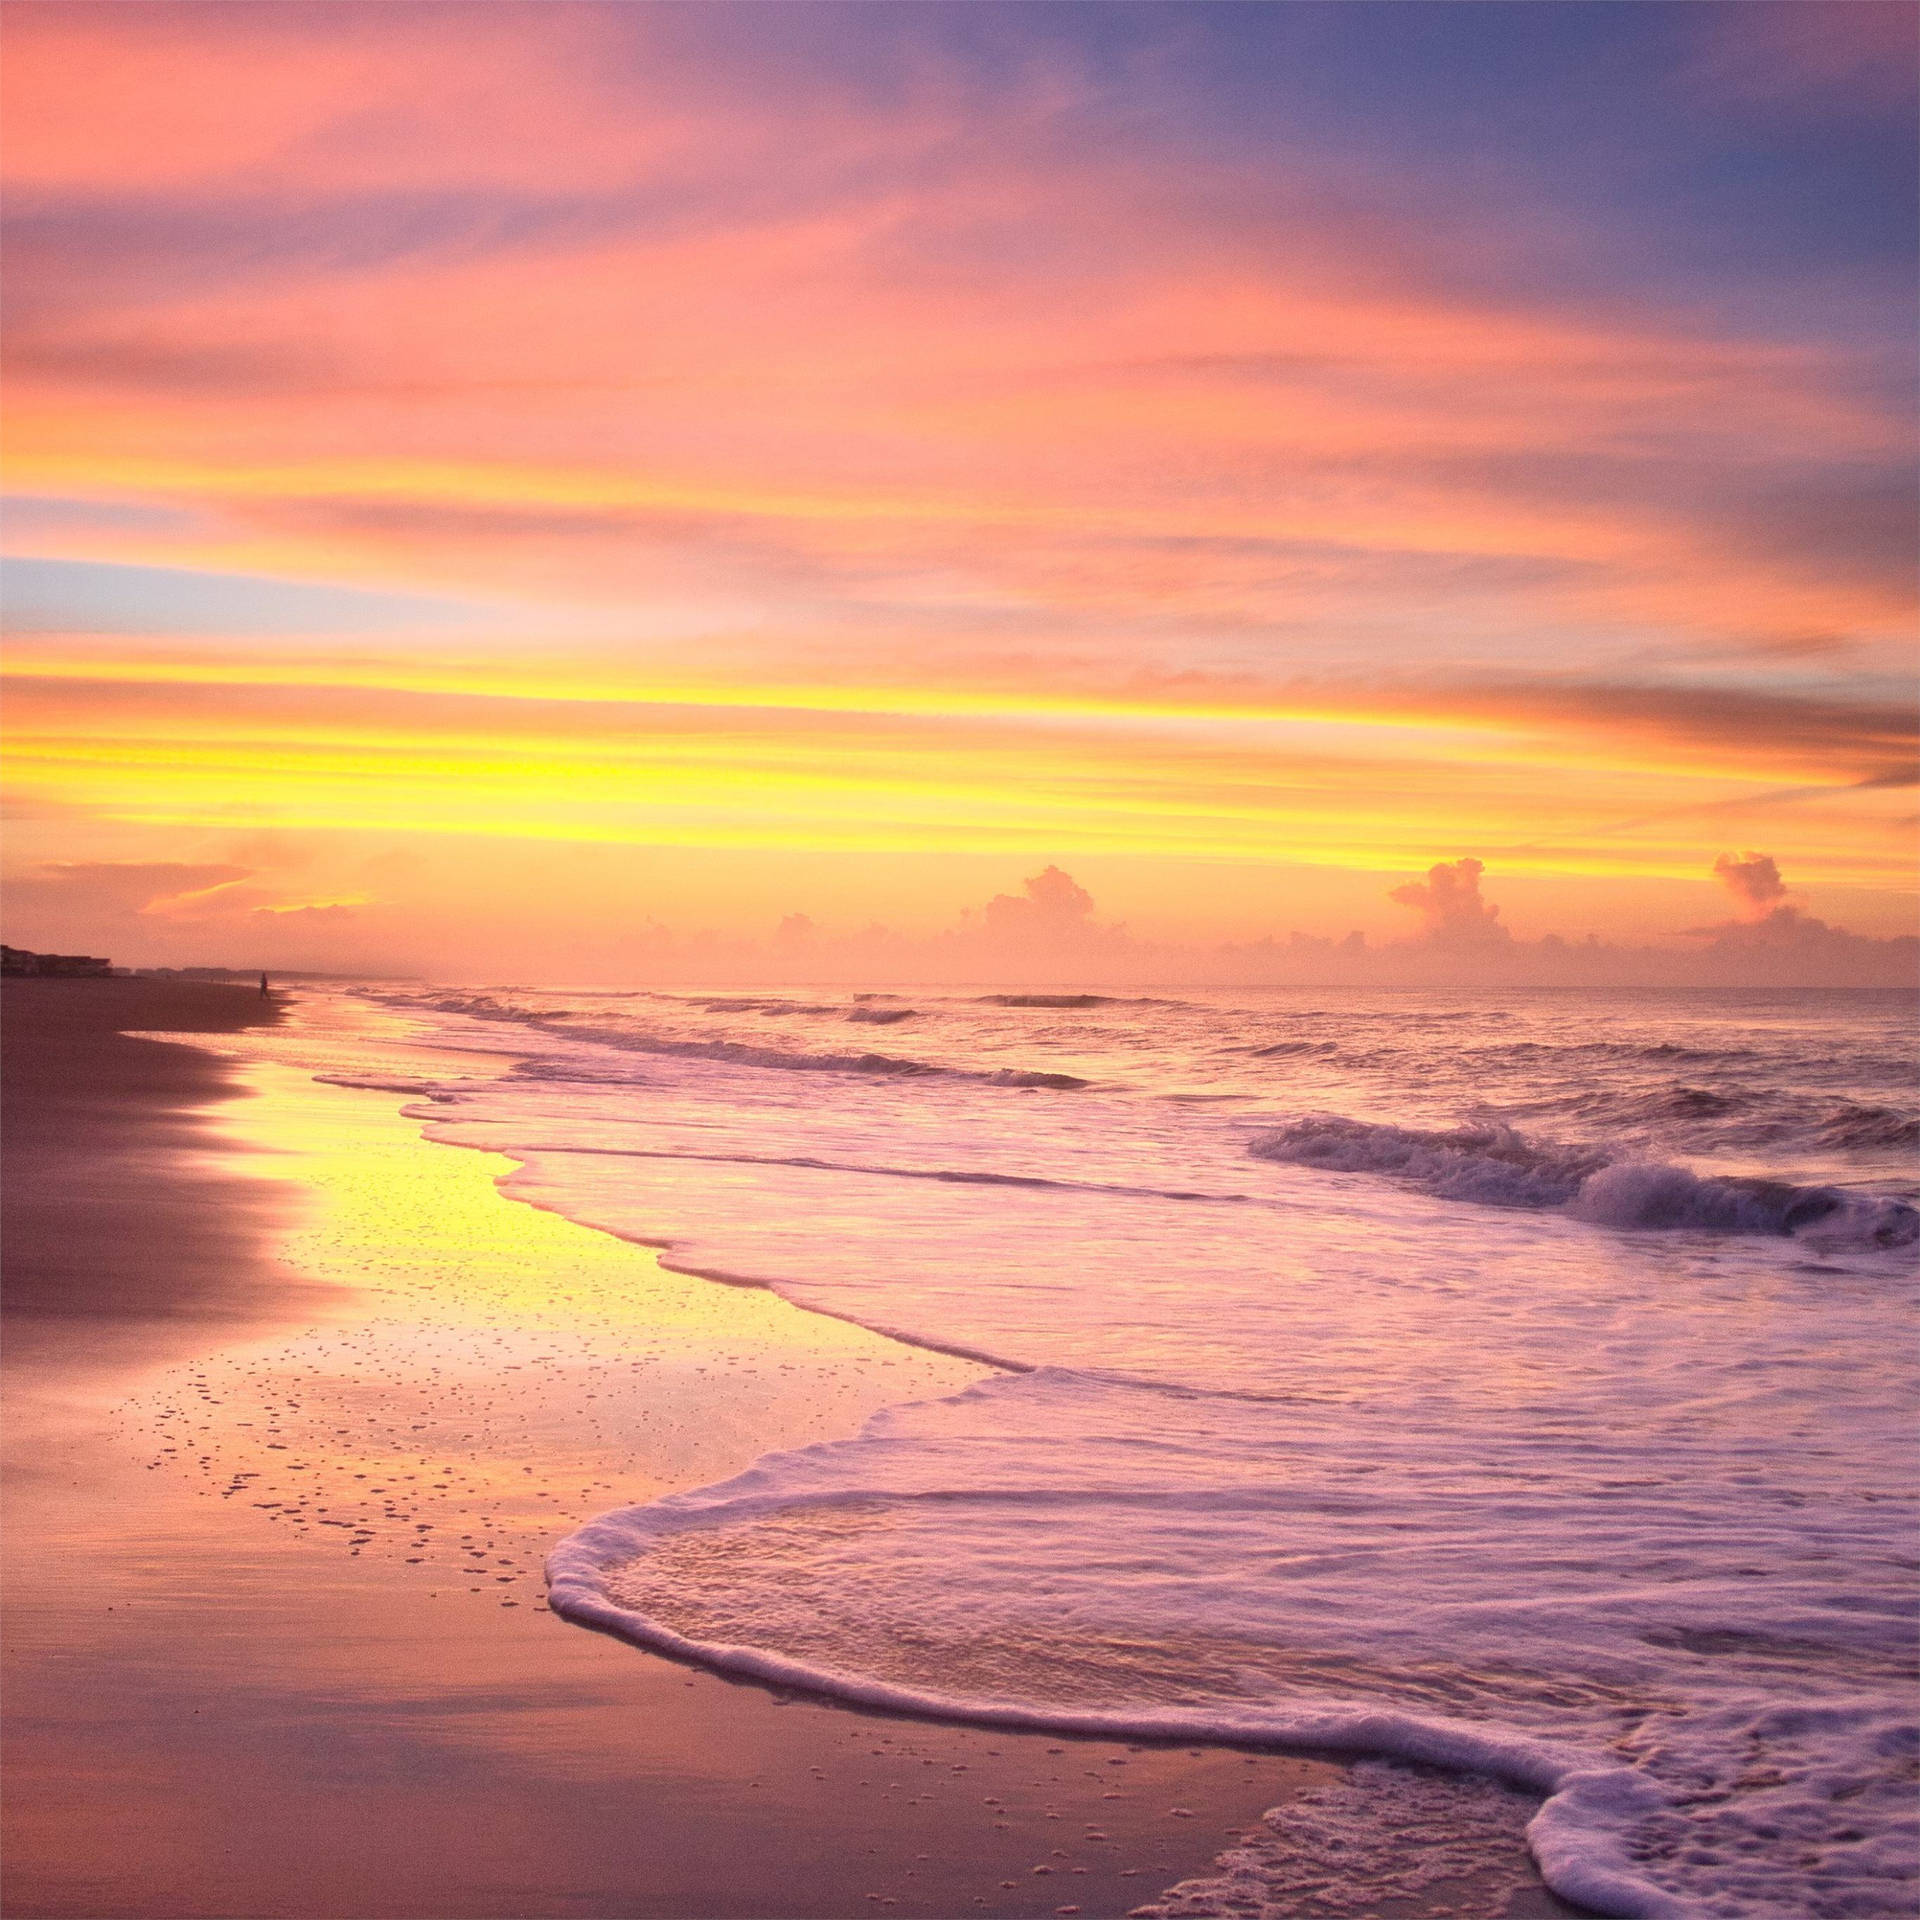 Download A Beach With Waves And A Sunset Wallpaper